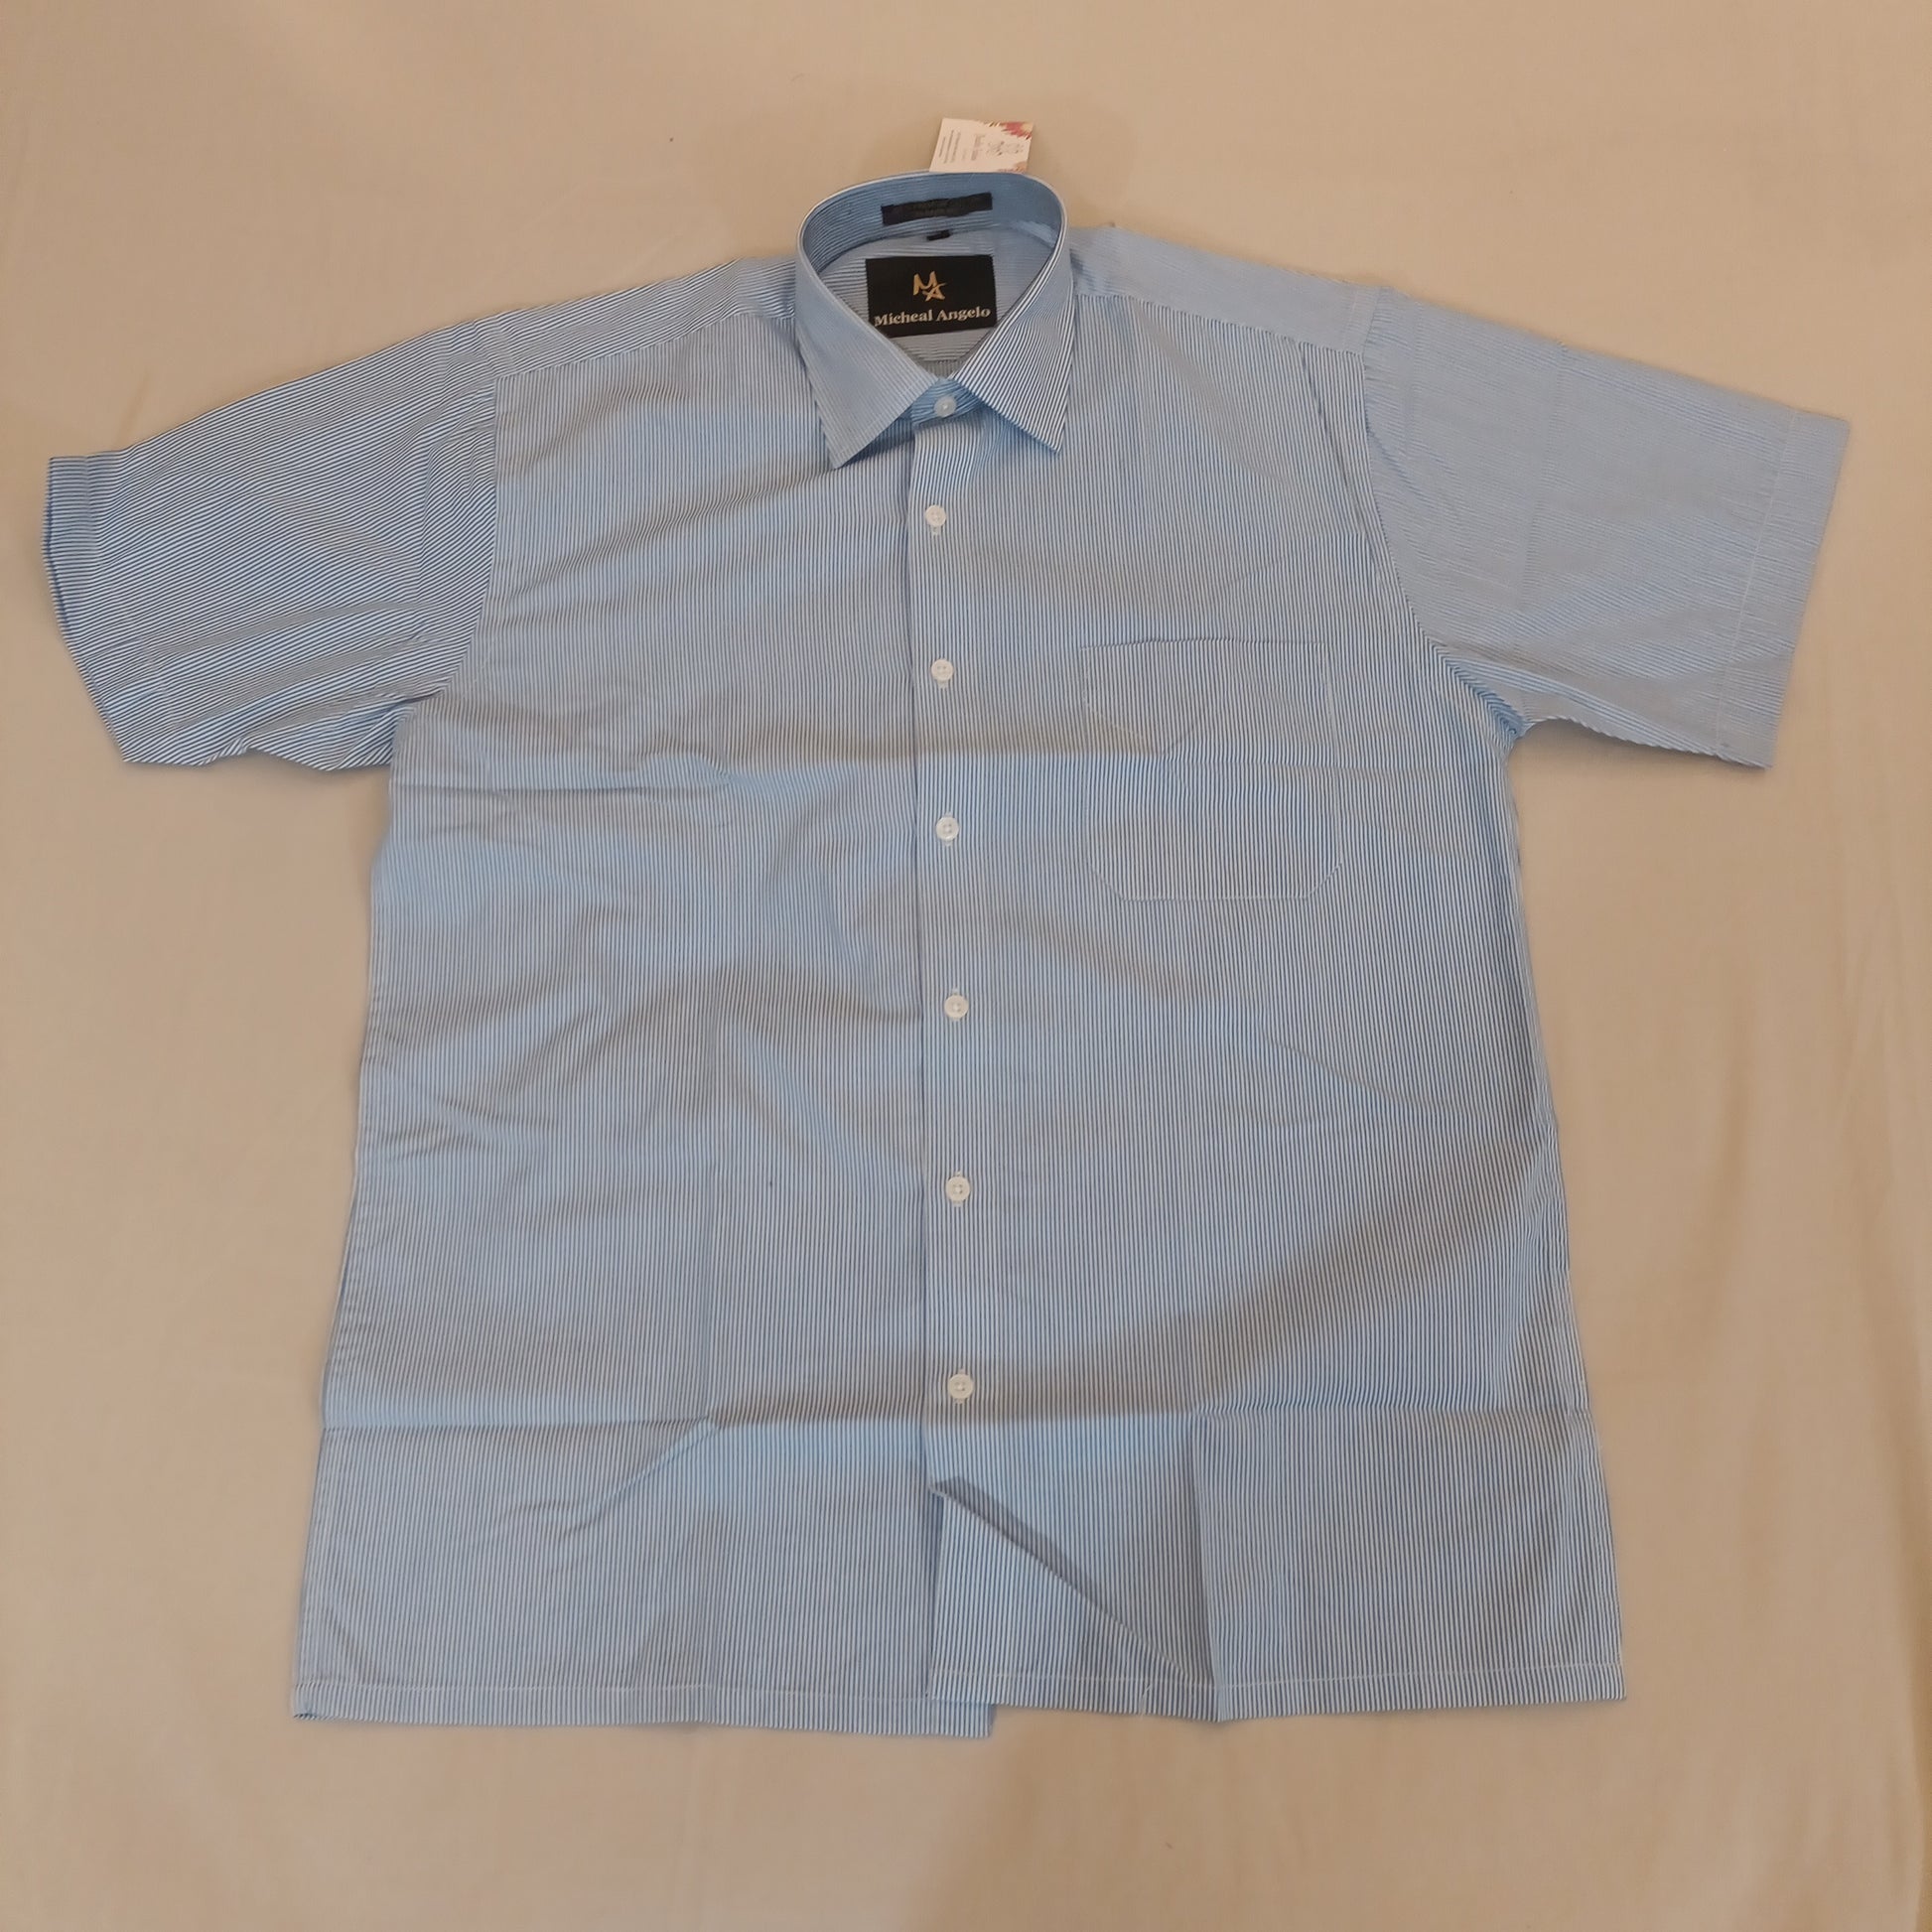 Elegant White And Light Blue Colored Shirt With Half Sleeves